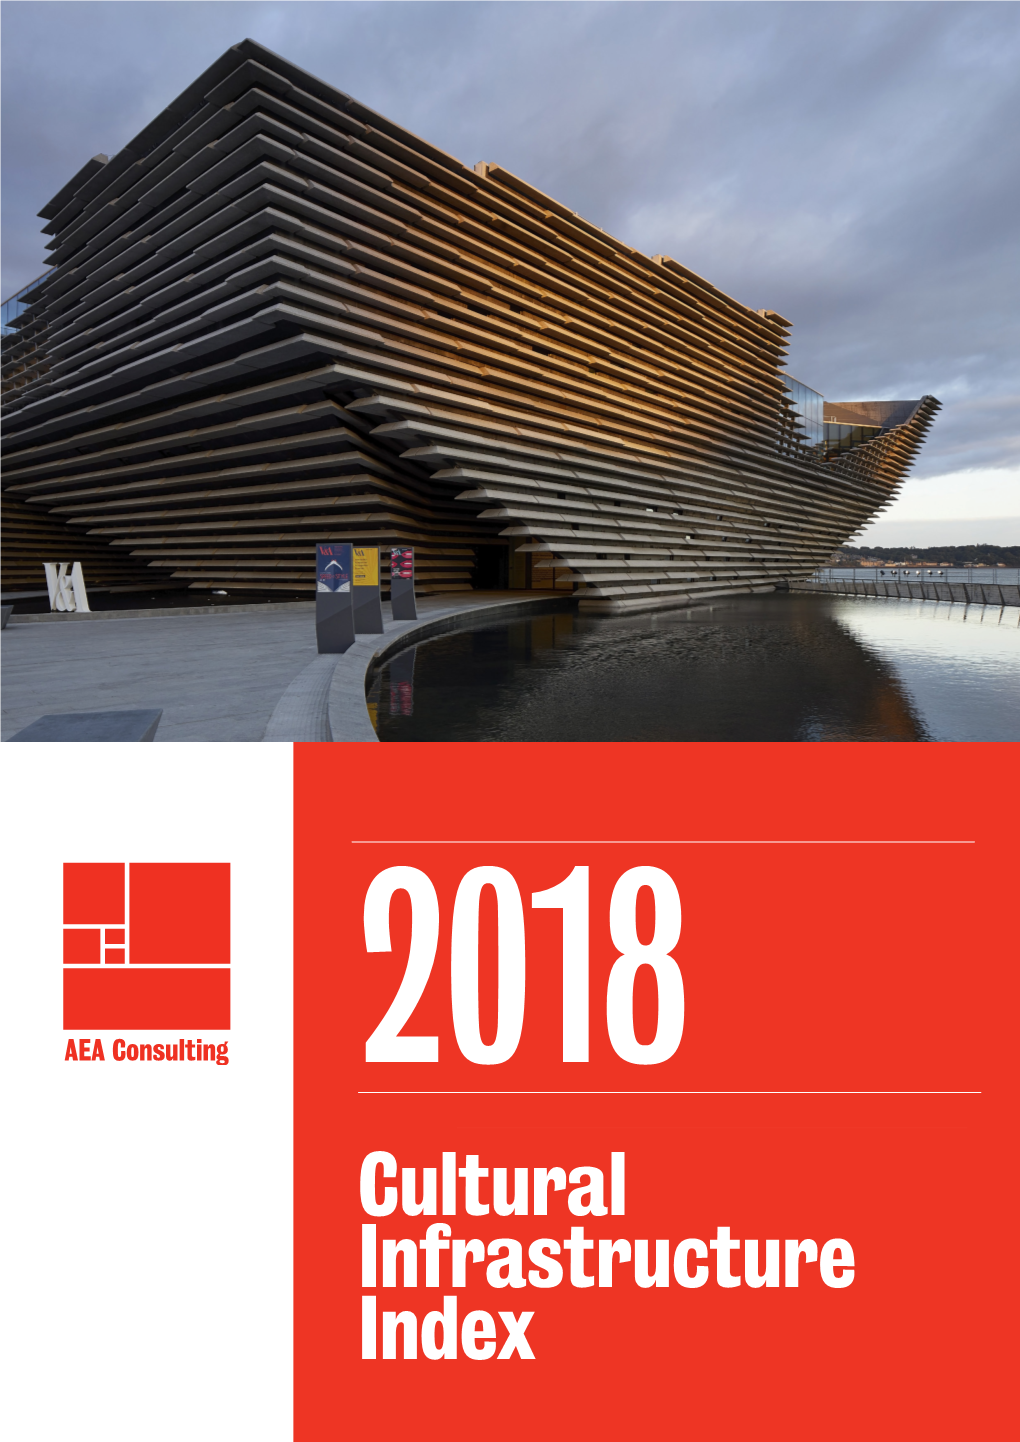 2018 Cultural Infrastructure Index AEA